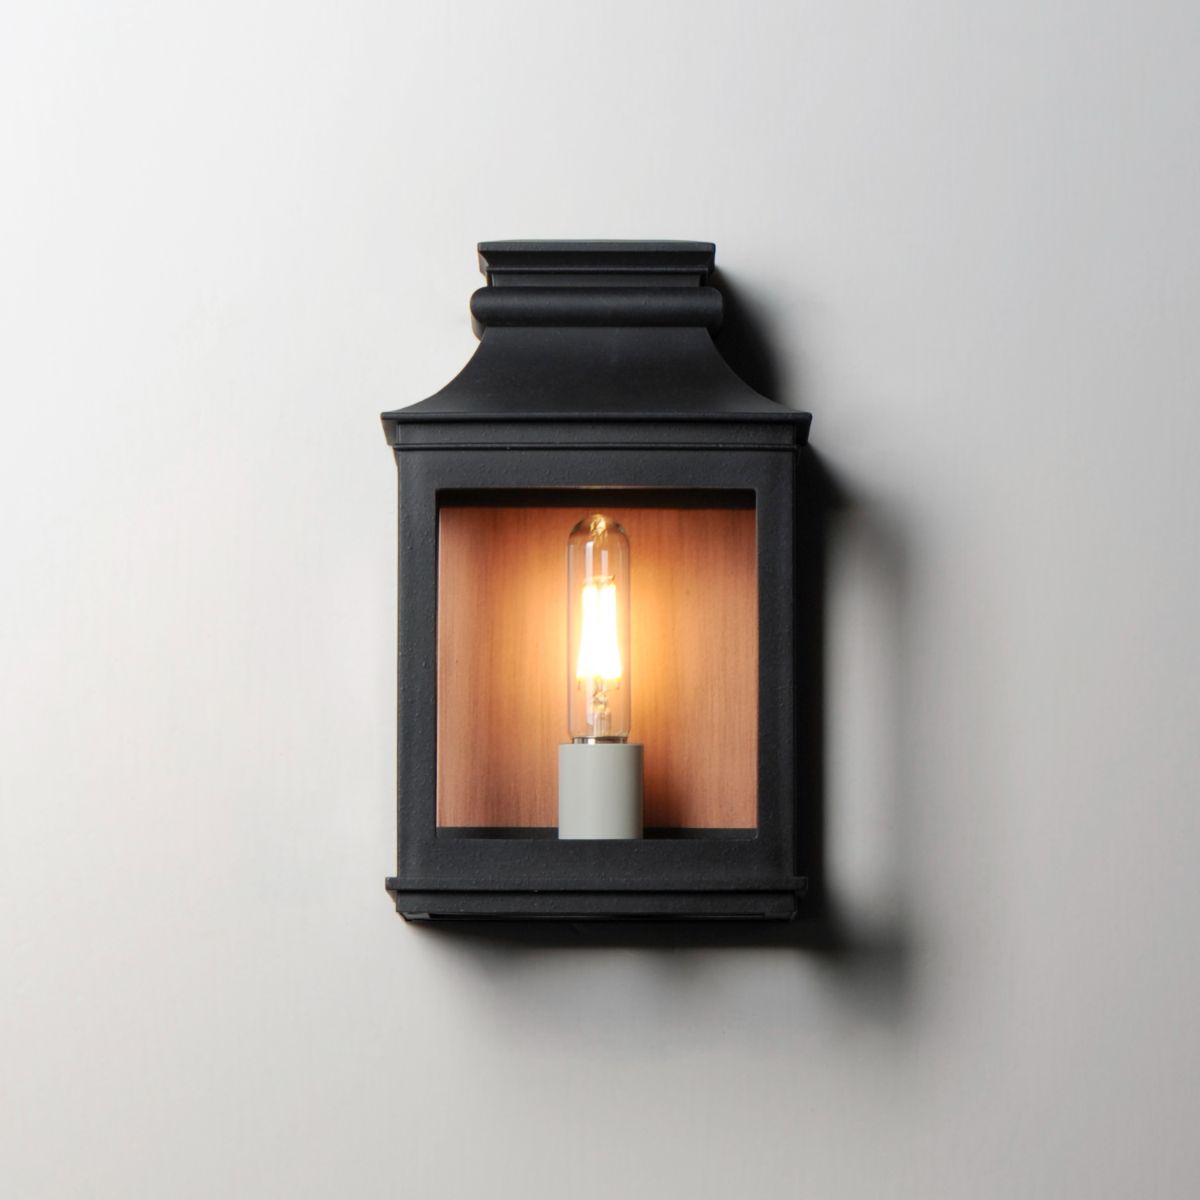 Savannah VX 13 in. Outdoor Wall Sconce